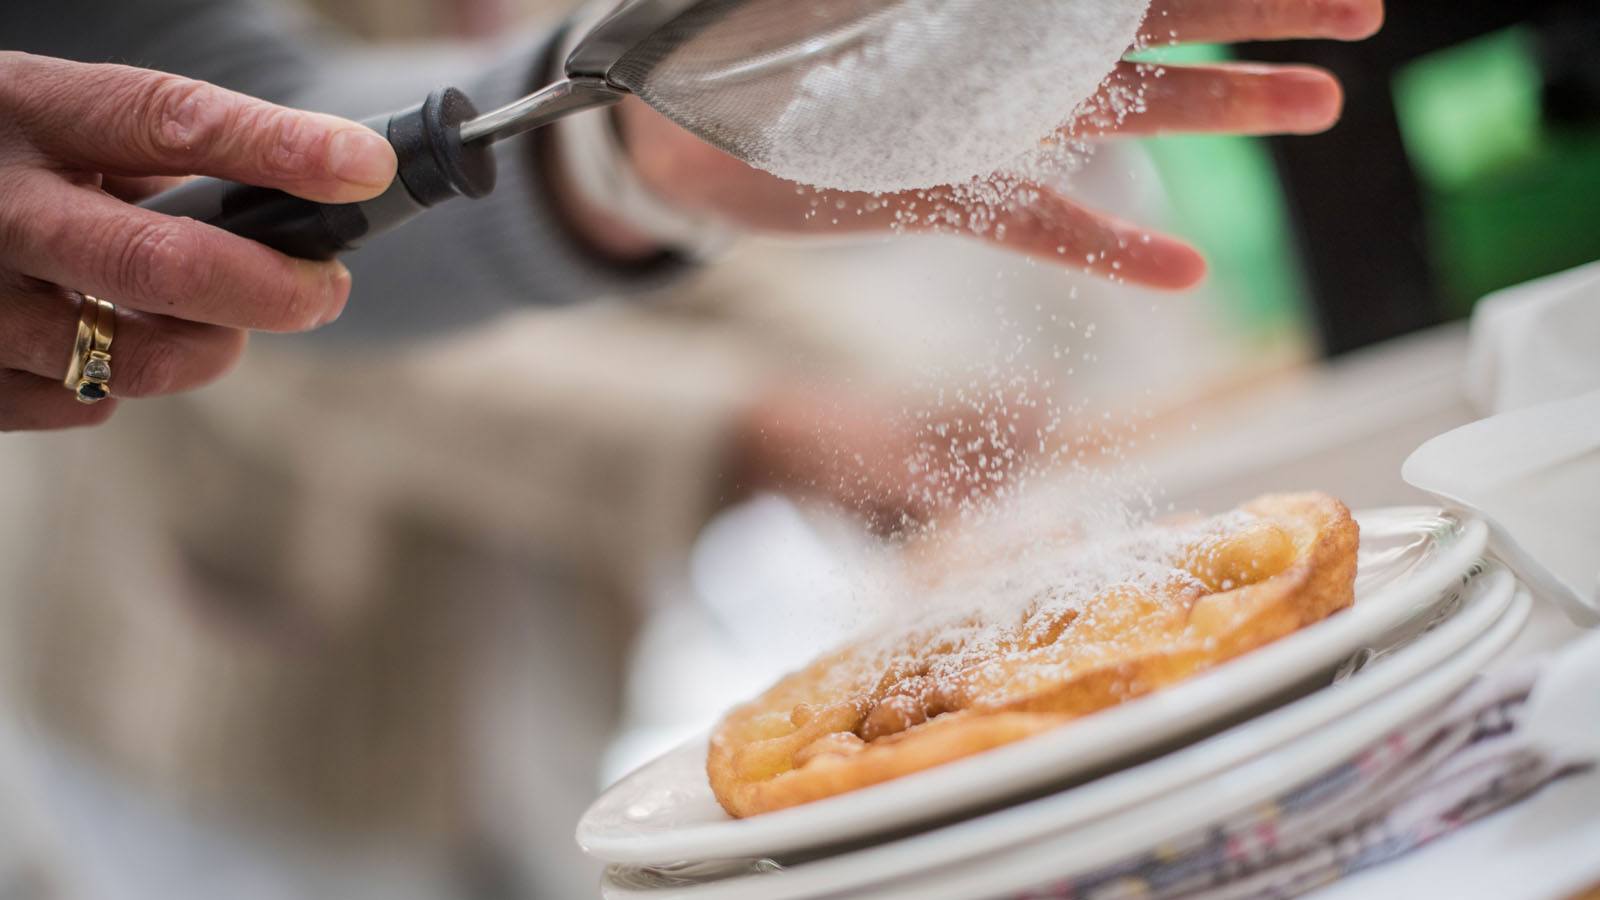 a member of the kitchen staff at the Hotel Tyrol in Casies sprinkles icing sugar over a traditional South Tyrolean apple strudel